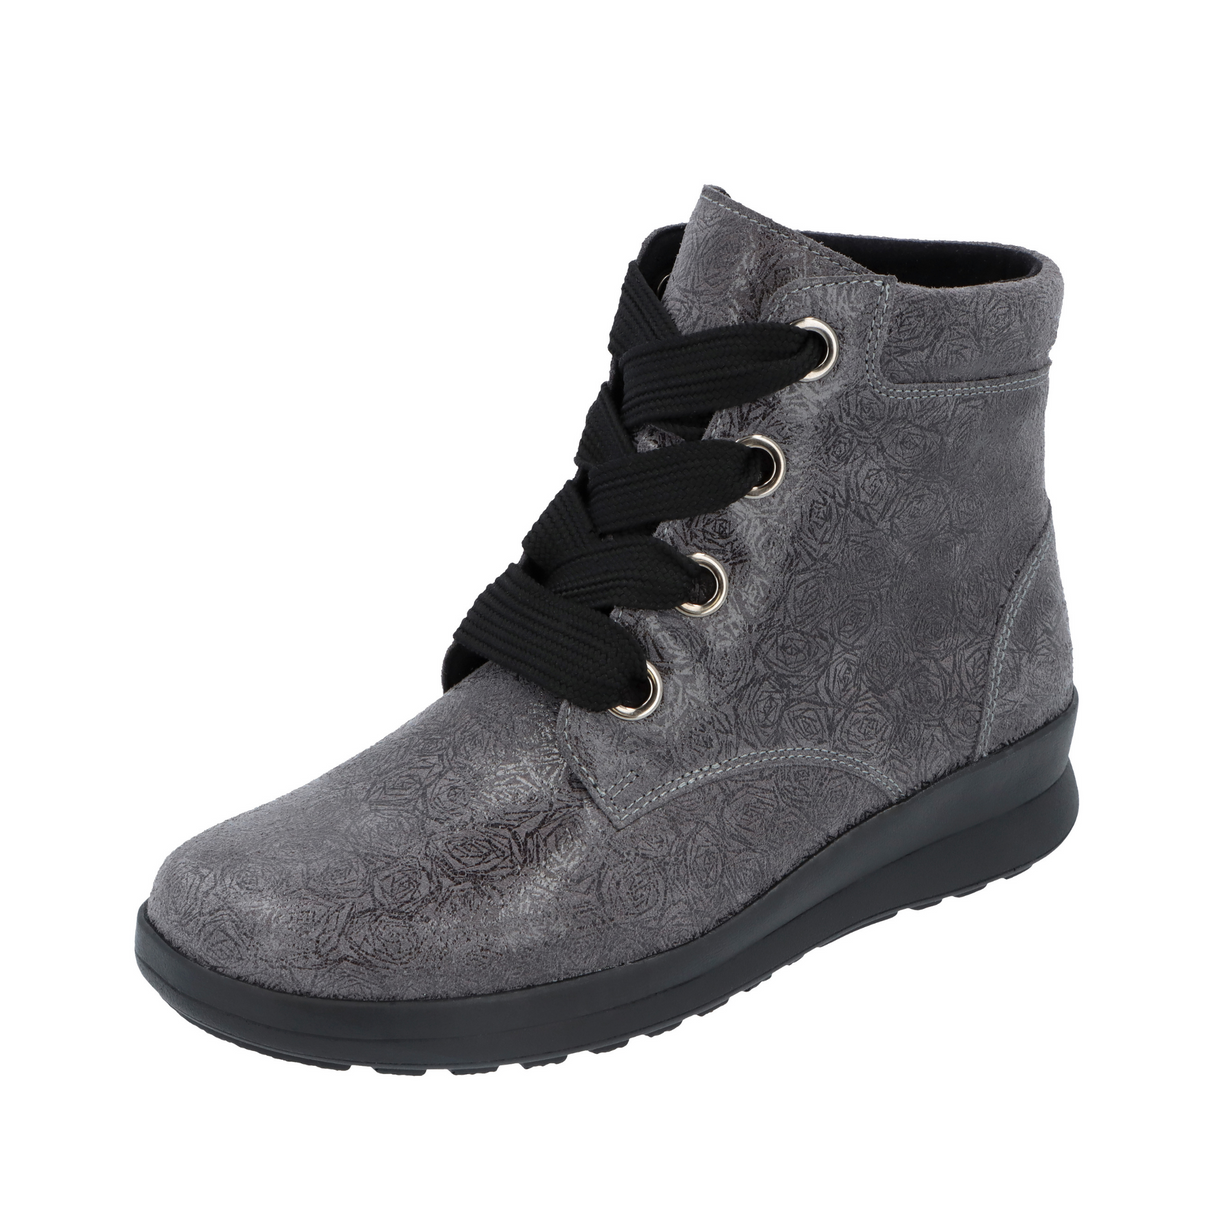 RIA shoes | Anthracite color